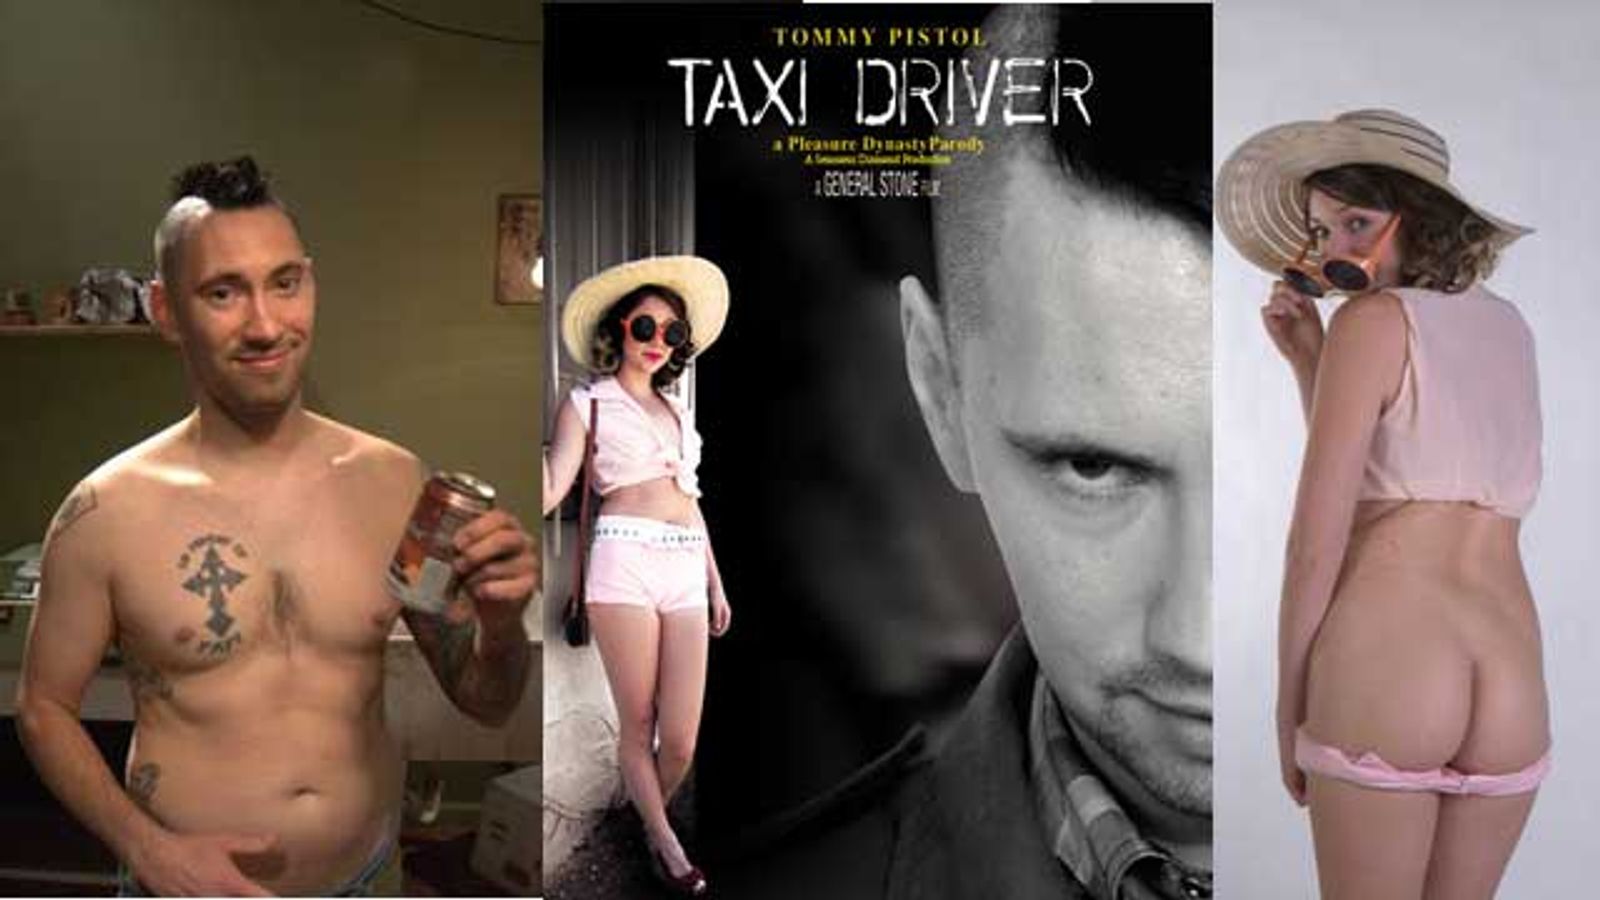 'Taxi Driver XXX' Nominated for XRCO Best Parody Award